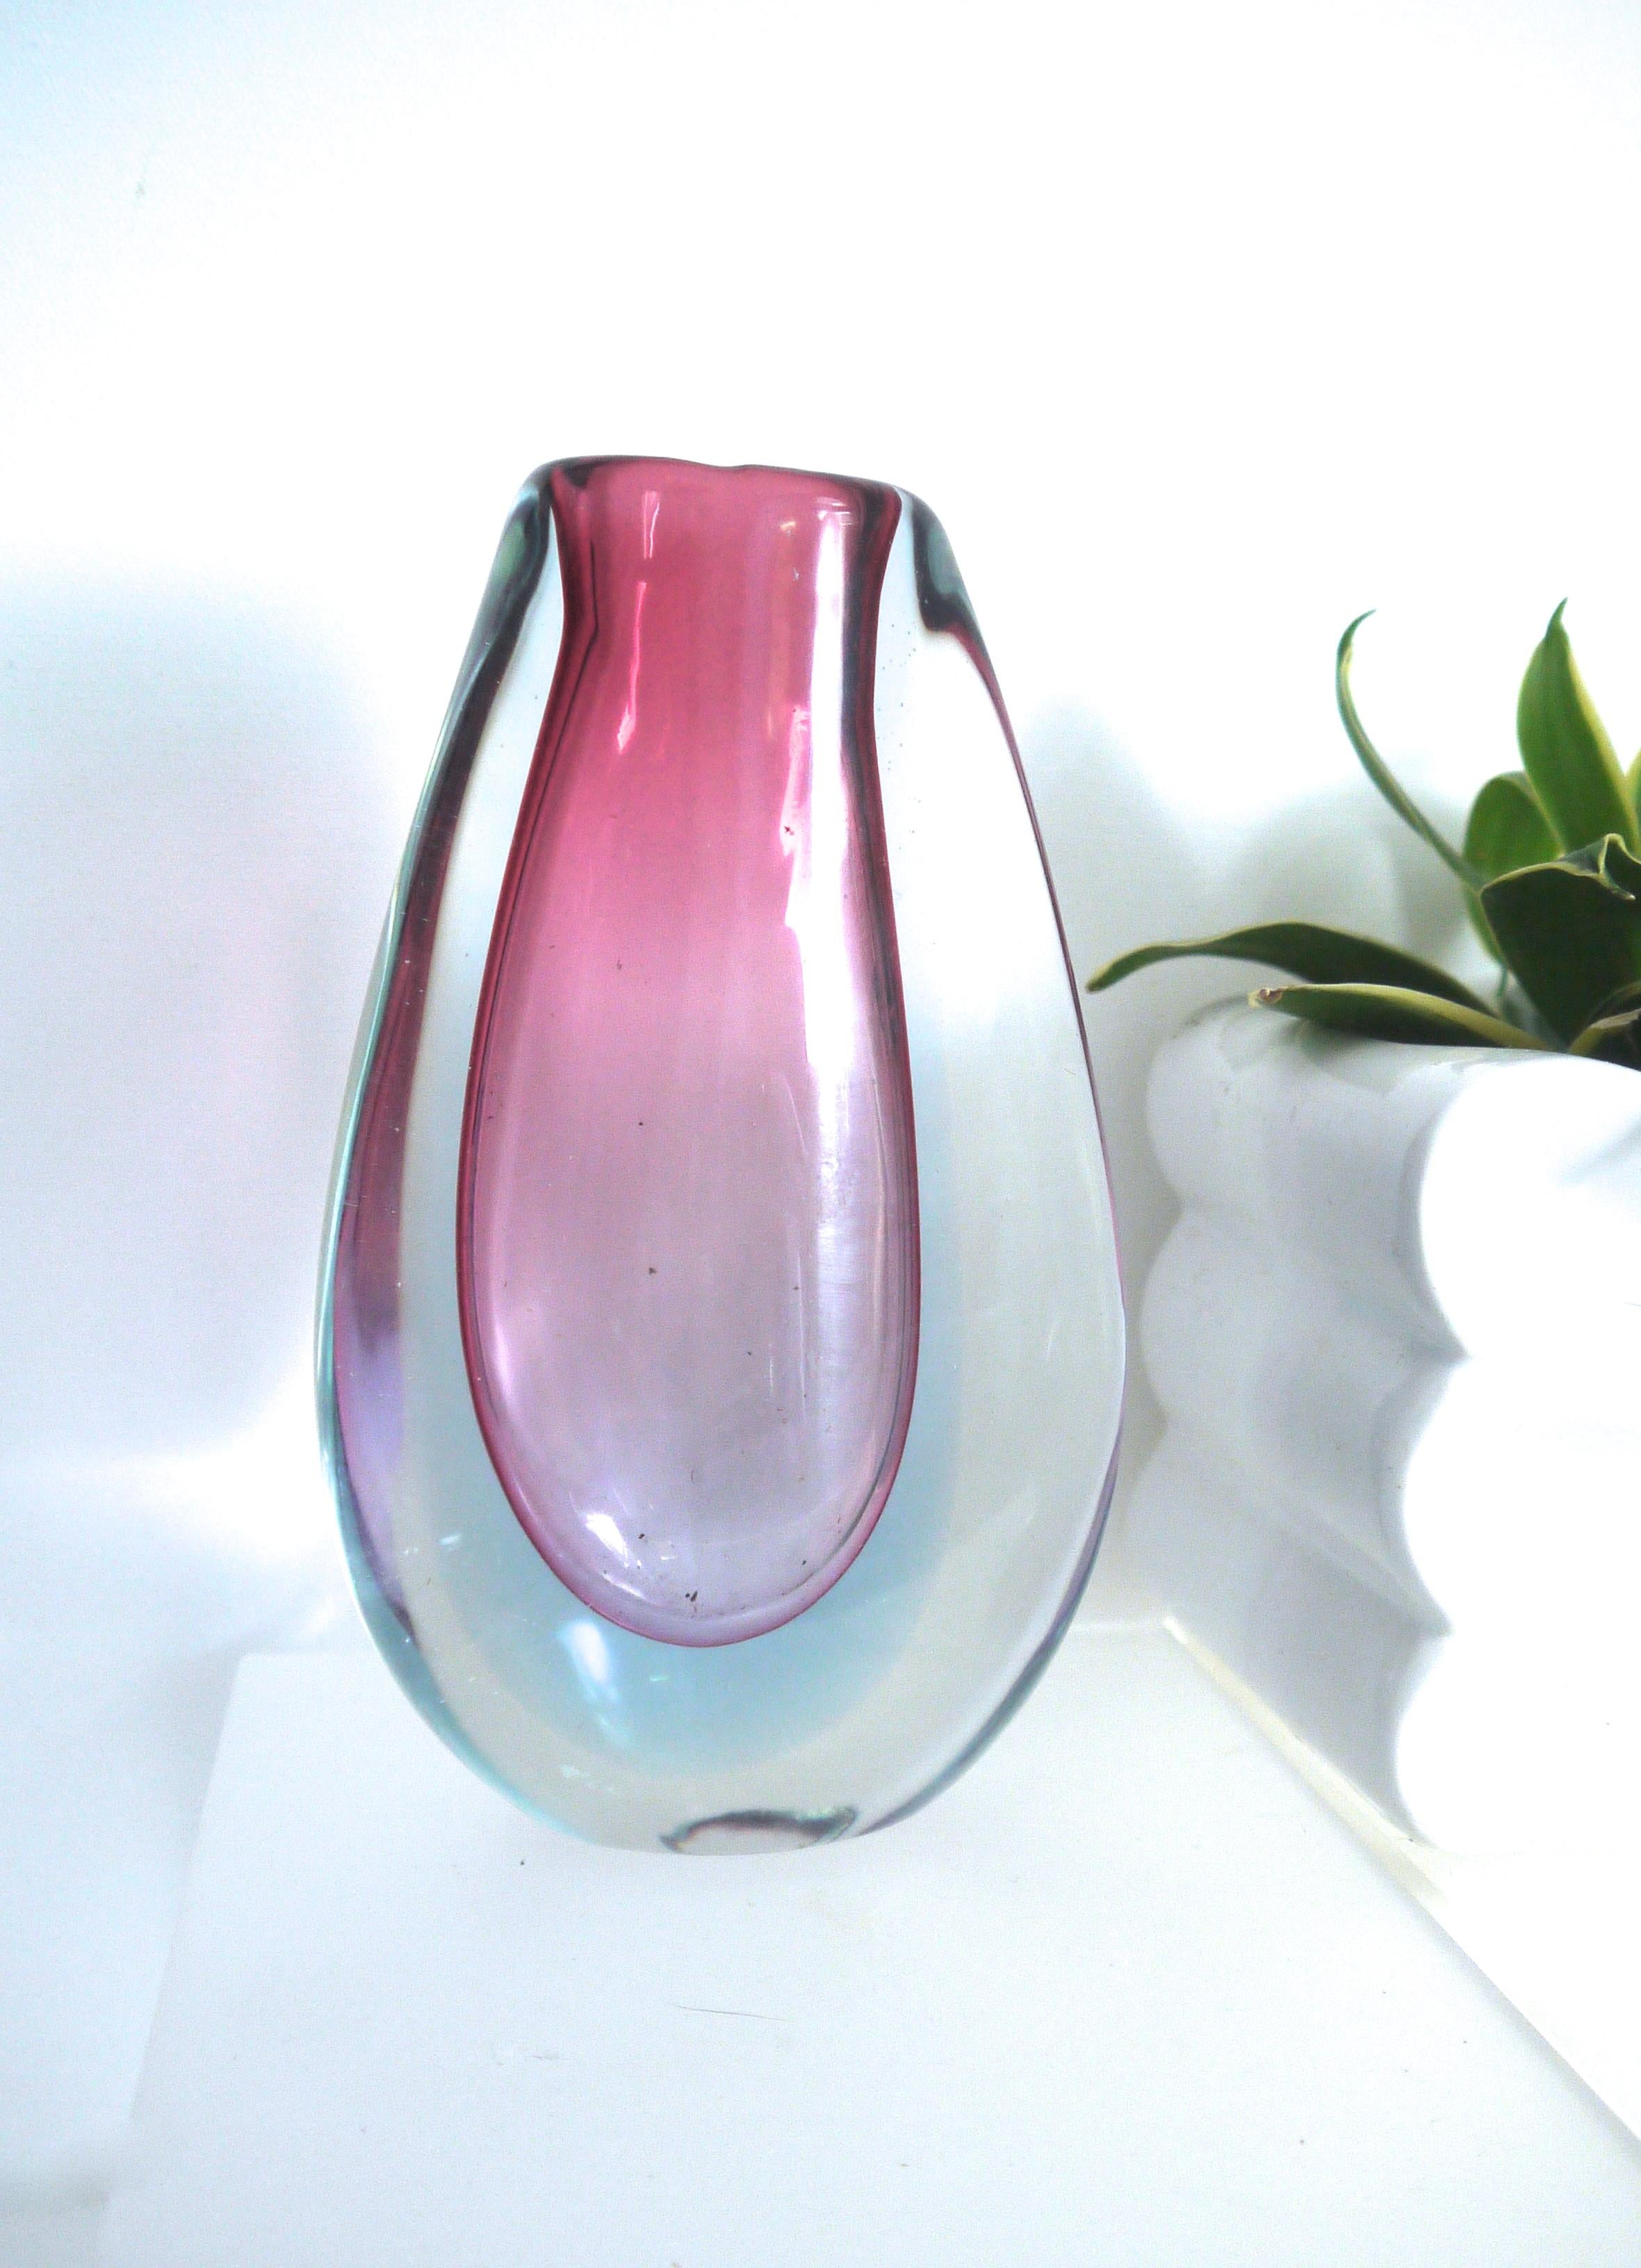 Late 20th Century Murano Sommerso Teardrop Vintage Art Glass Vase Late 1960s-1970s Blues and Pinks For Sale